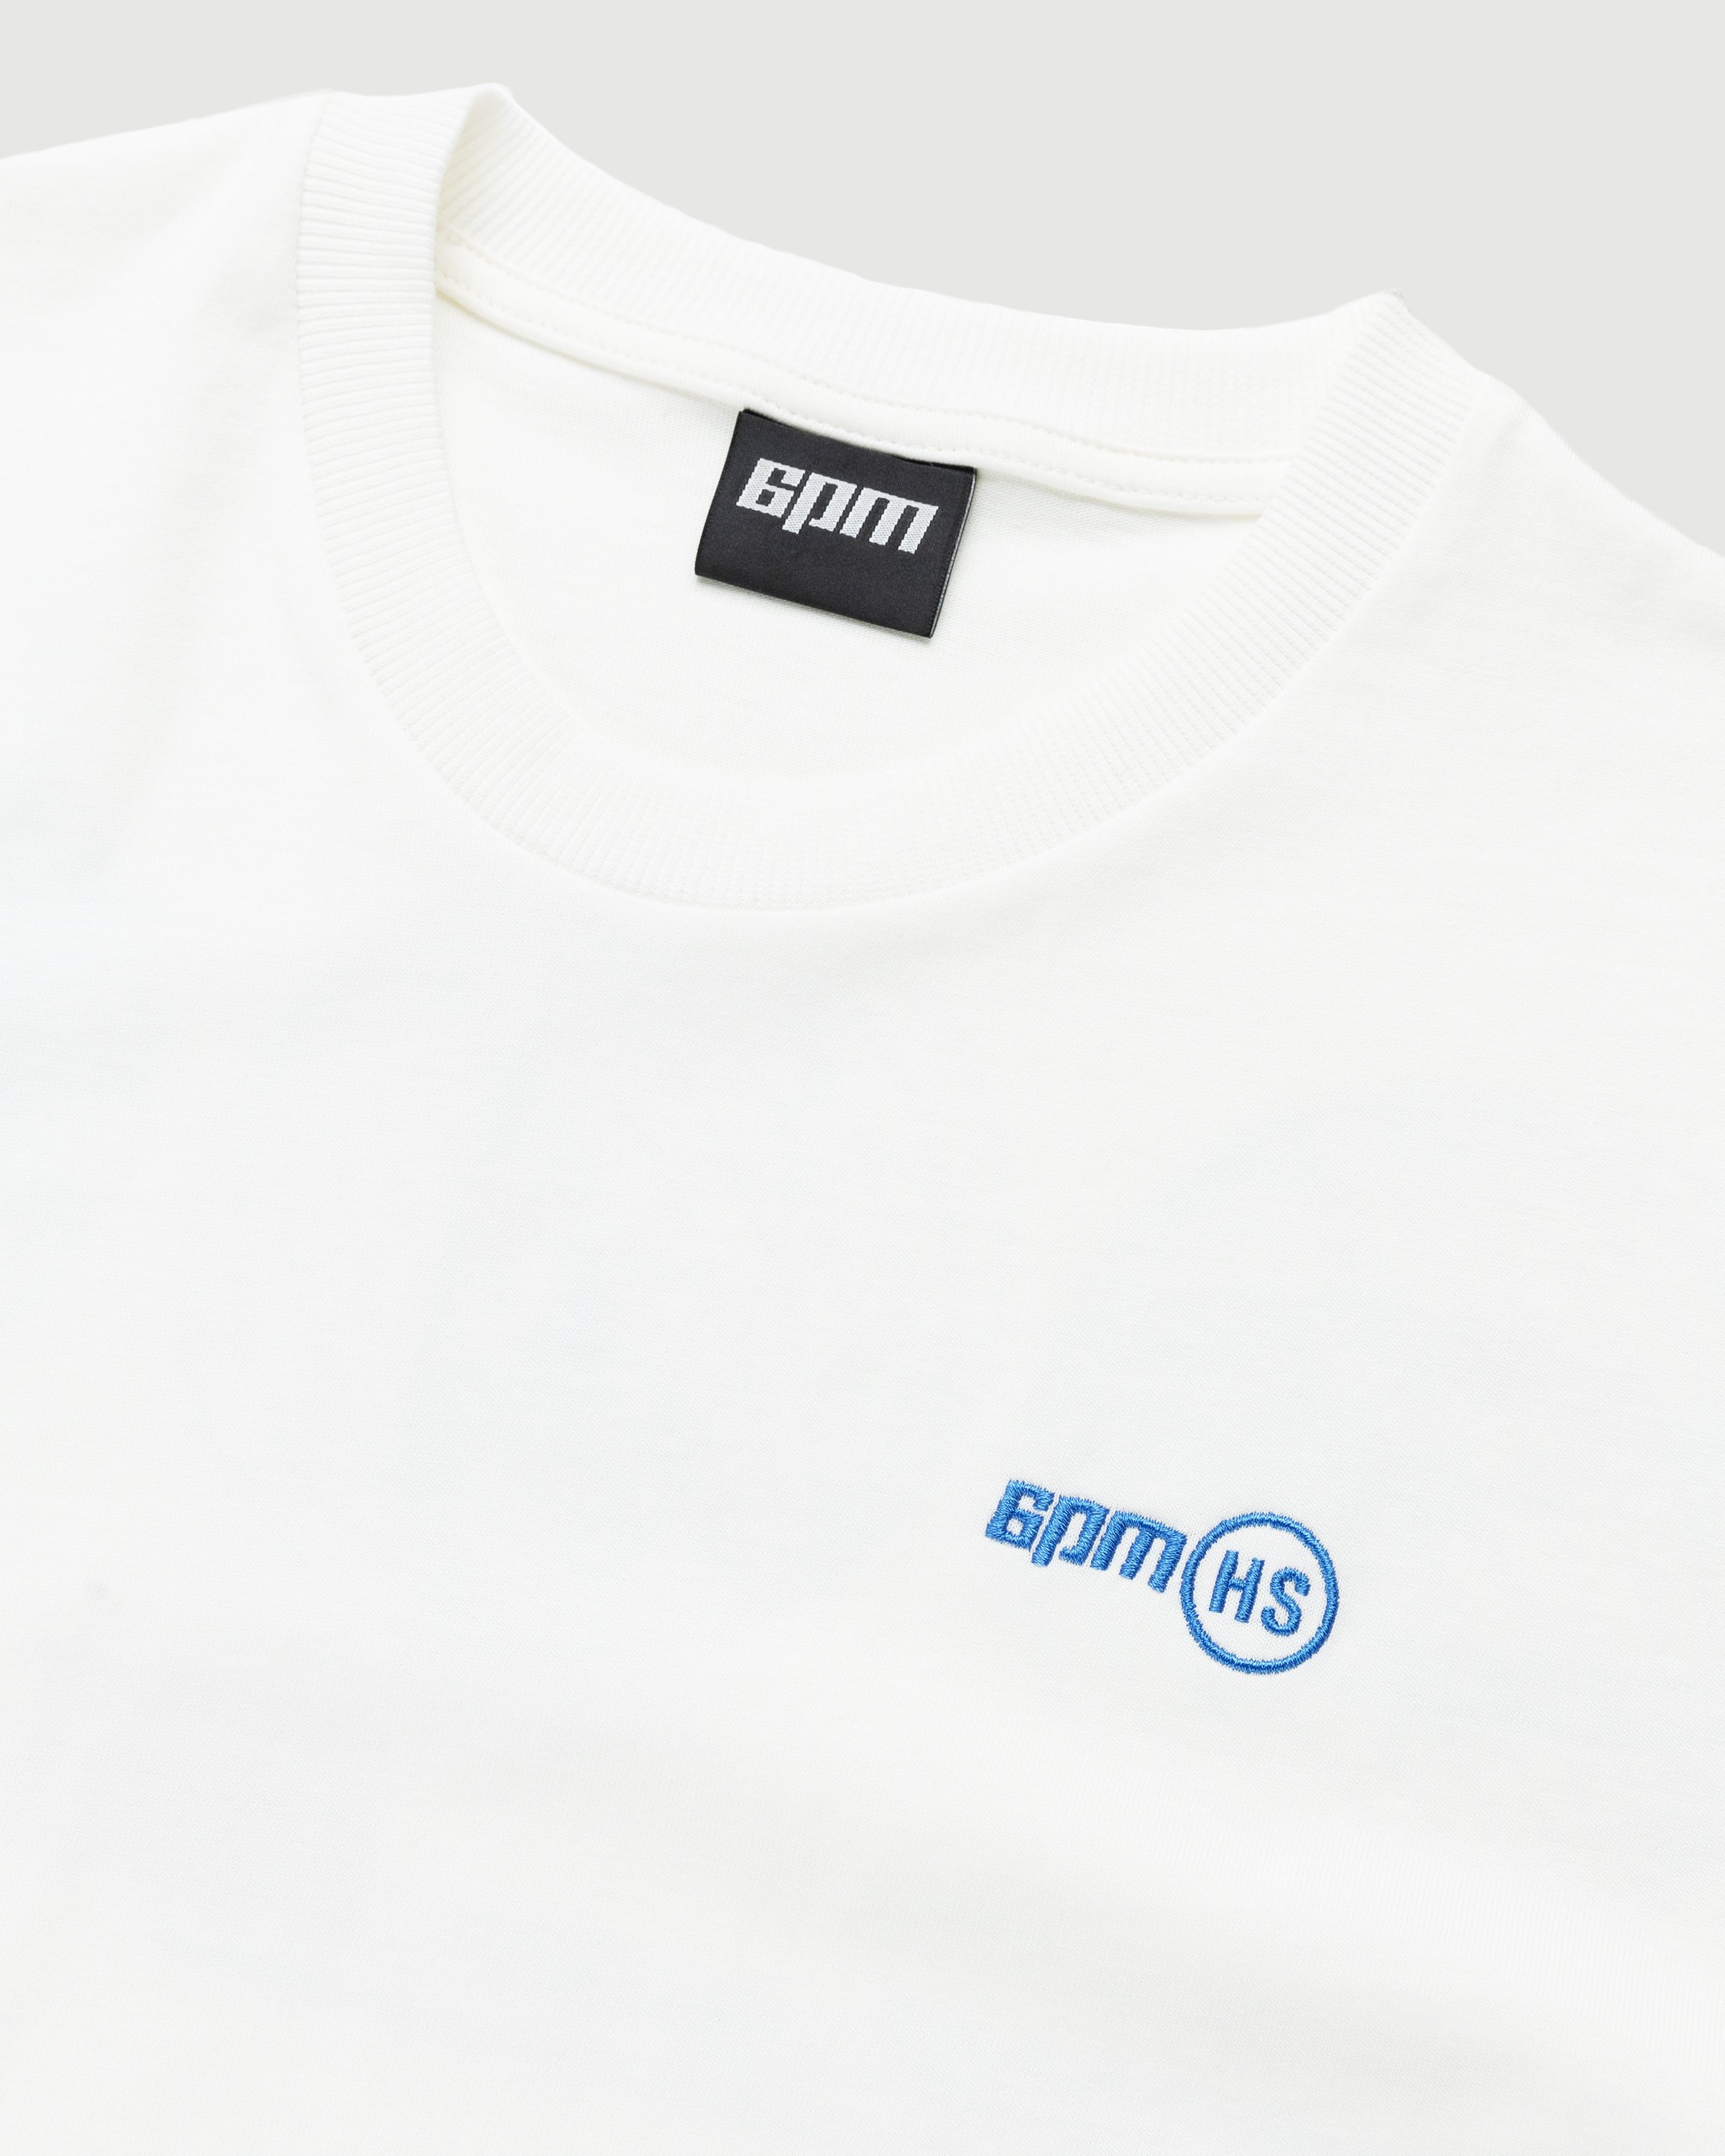 6PM x Highsnobiety - BERLIN, BERLIN 3 Only Wear After 6PM T-Shirt White - Clothing - White - Image 3